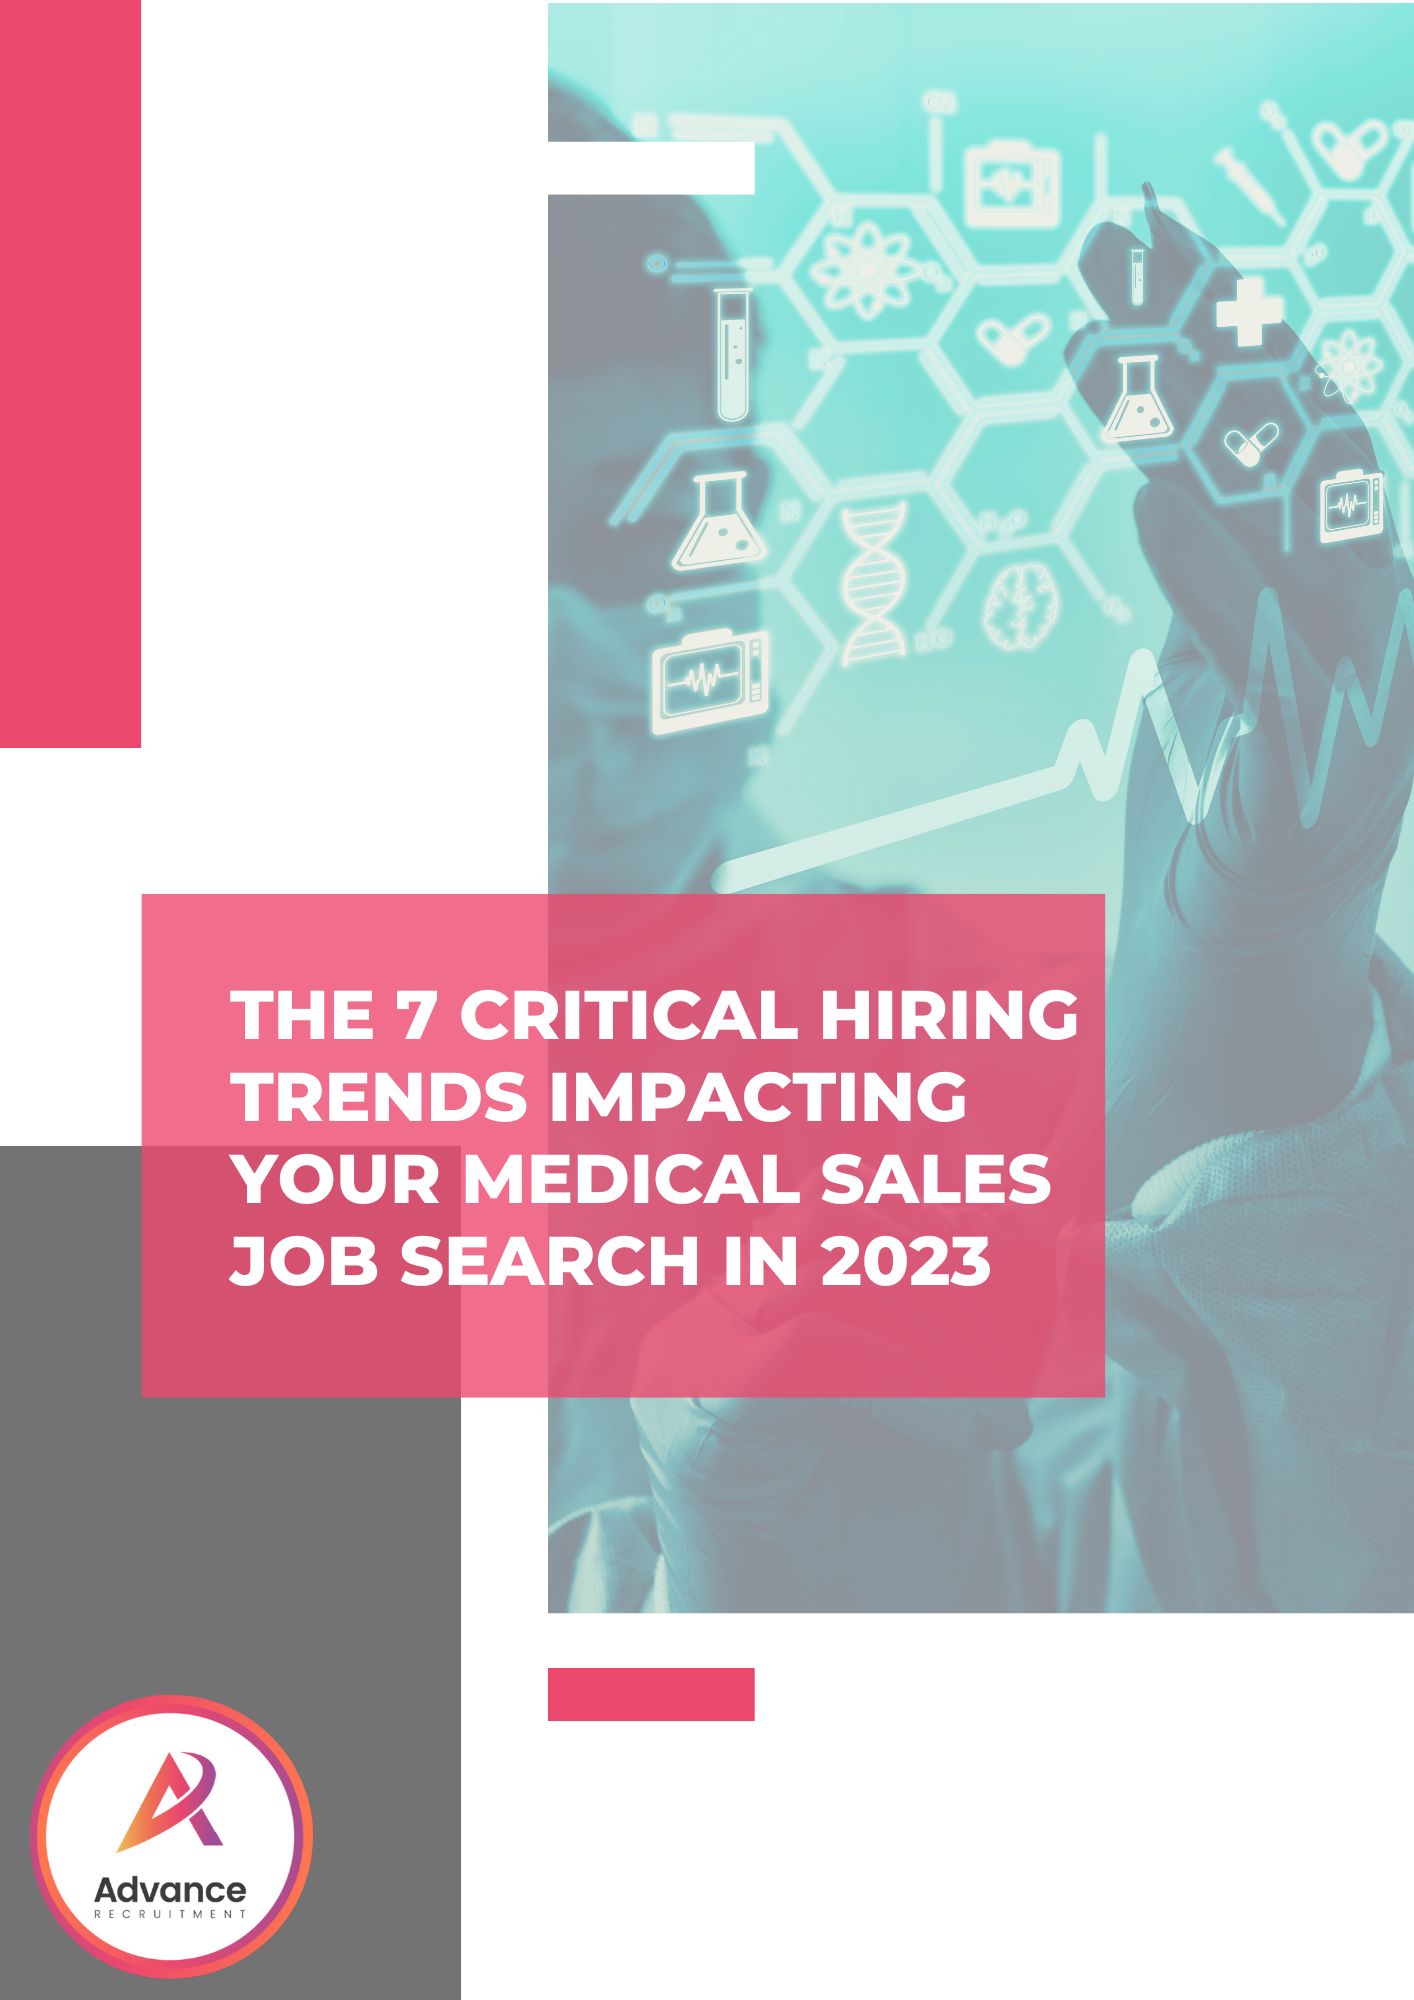 The 7 Hiring Trends Impacting Your Medical Sales Job Search in 2023